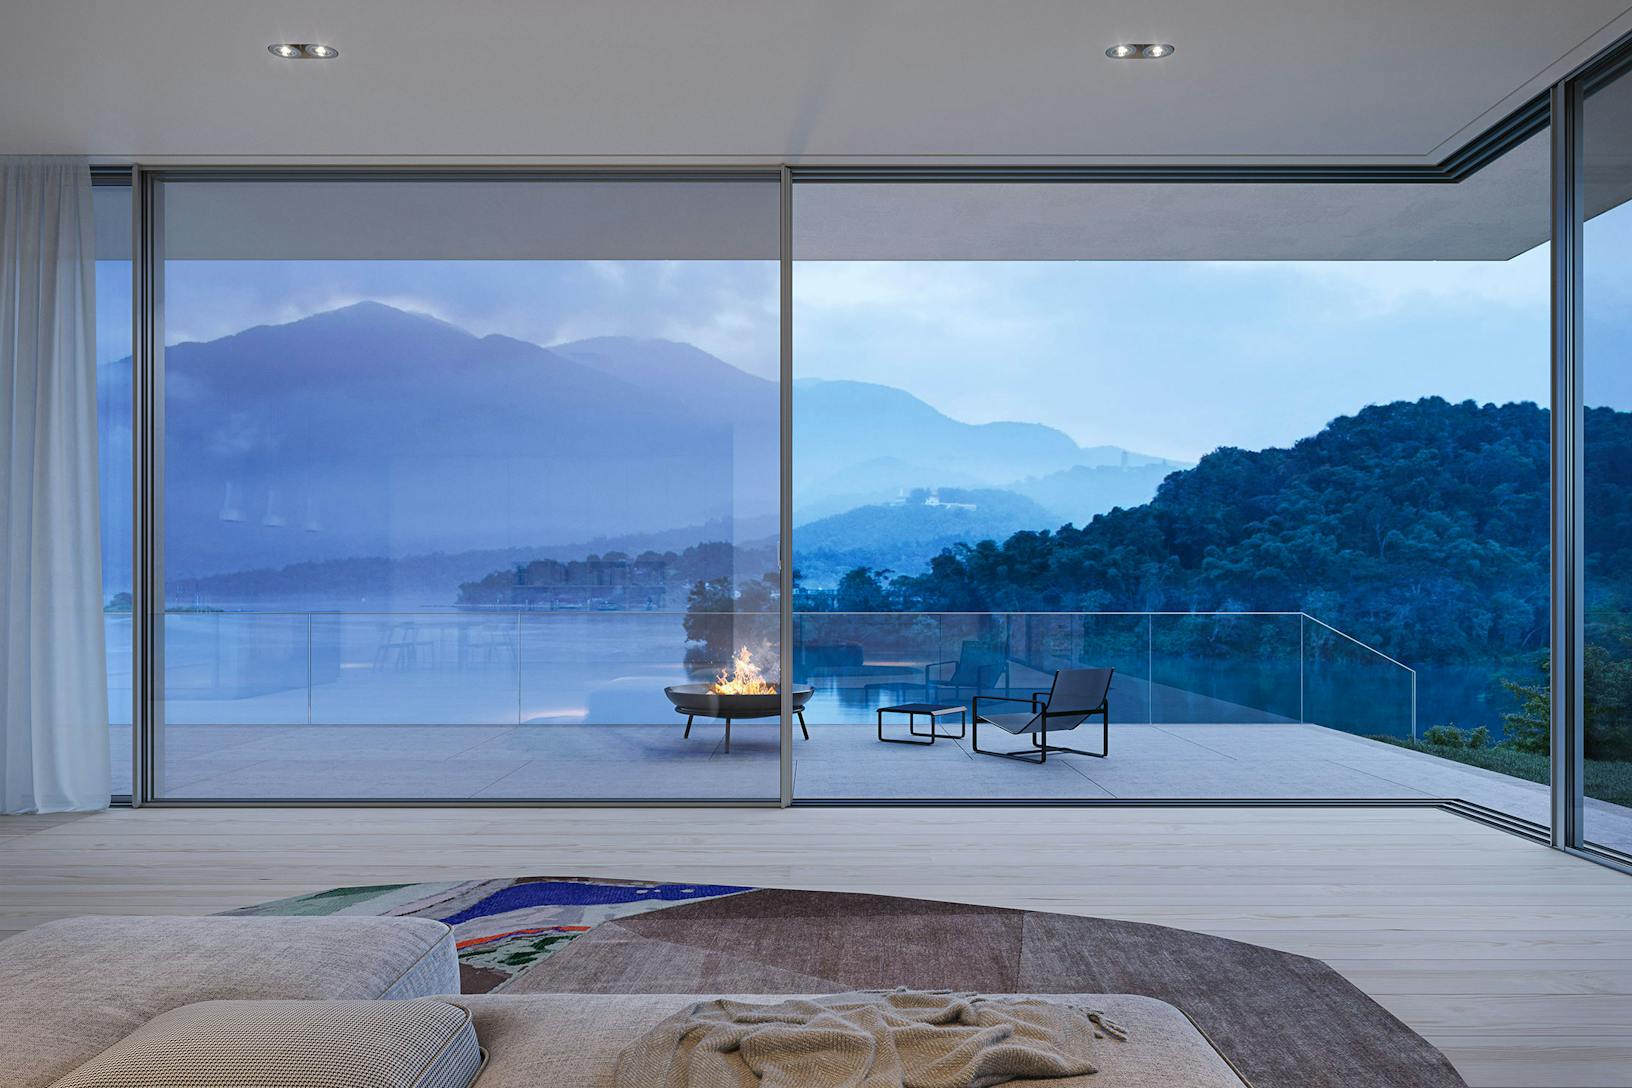 A bedroom with minimal sliding glass walls and an open corner that provides a breathtaking view of the mountains